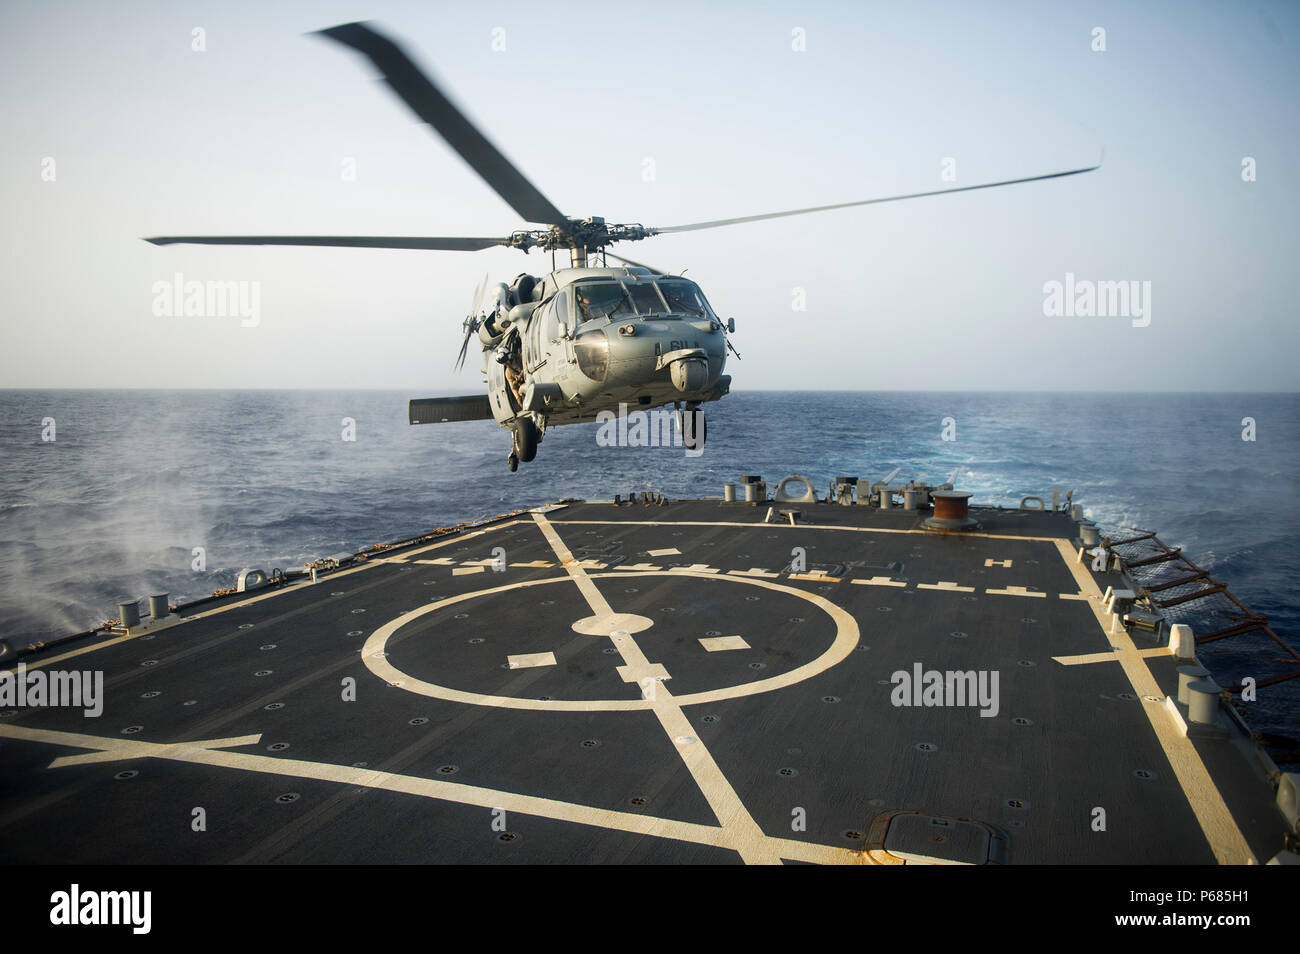 160526-N-VE959-134 GULF OF ADEN (May 26, 2016) An MH-60S Sea Hawk helicopter, assigned to the 'Night Dippers' of Helicopter Sea Combat Squadron (HSC) 5, lands on the flight deck of guided-missile destroyer USS Gonzalez (DDG 66). Gonzalez is deployed as part of the Harry S. Truman Carrier Strike Group in support of Operation Inherent Resolve, maritime security operations and theater security cooperation efforts in the U.S. 5th Fleet area of operations. (U.S. Navy photo by Mass Communication Specialist 3rd Class Pasquale Sena/Released) Stock Photo